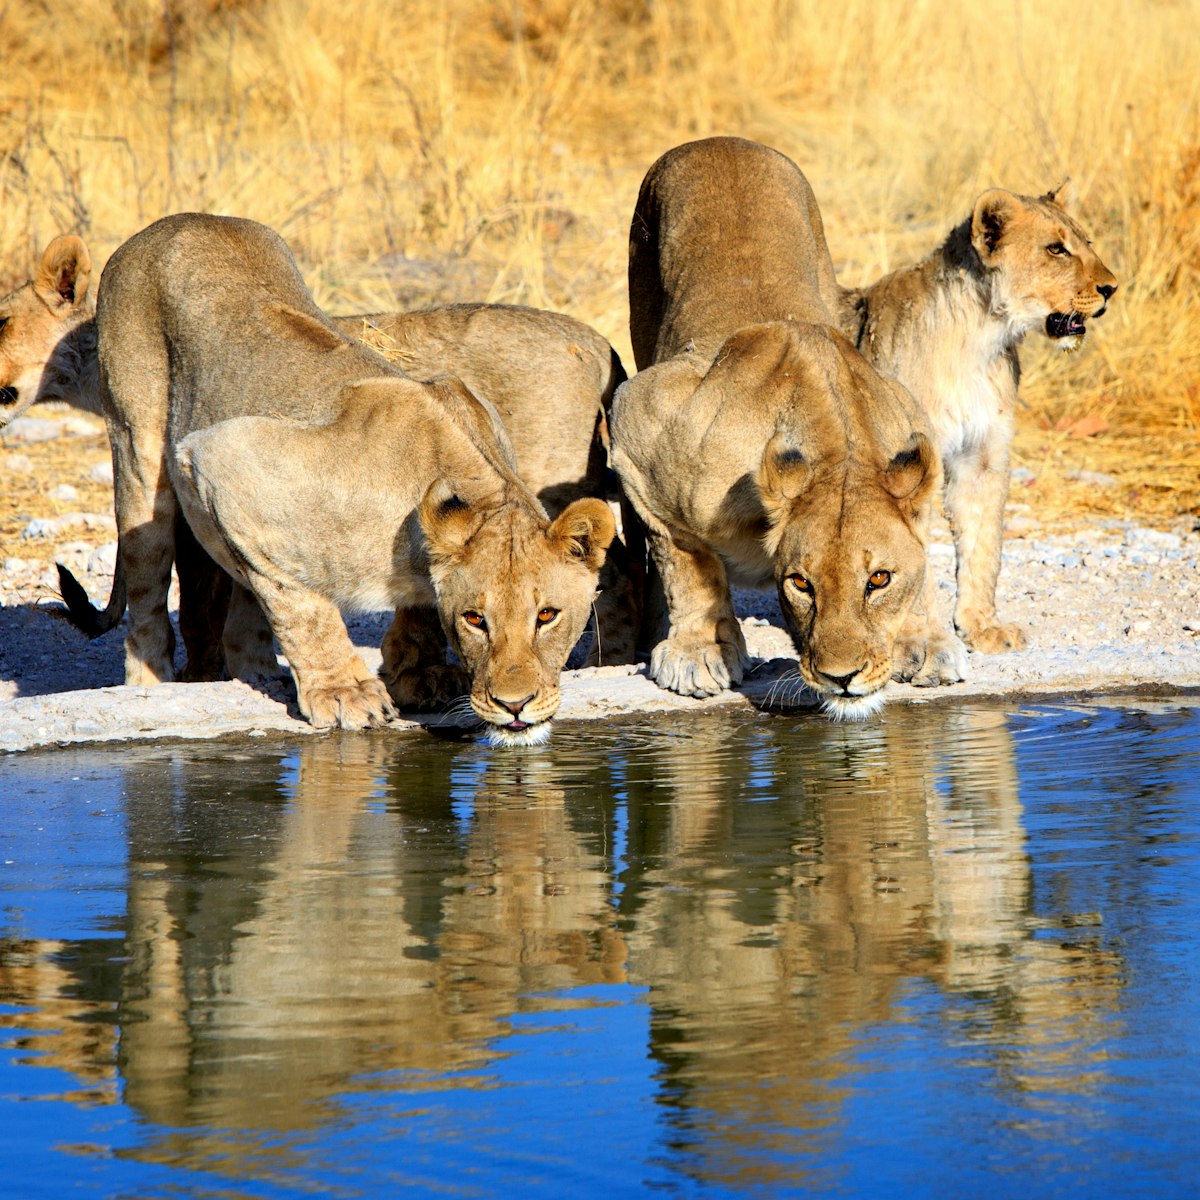 Pride of lions drinking from a waterhole in Etosha National Park.